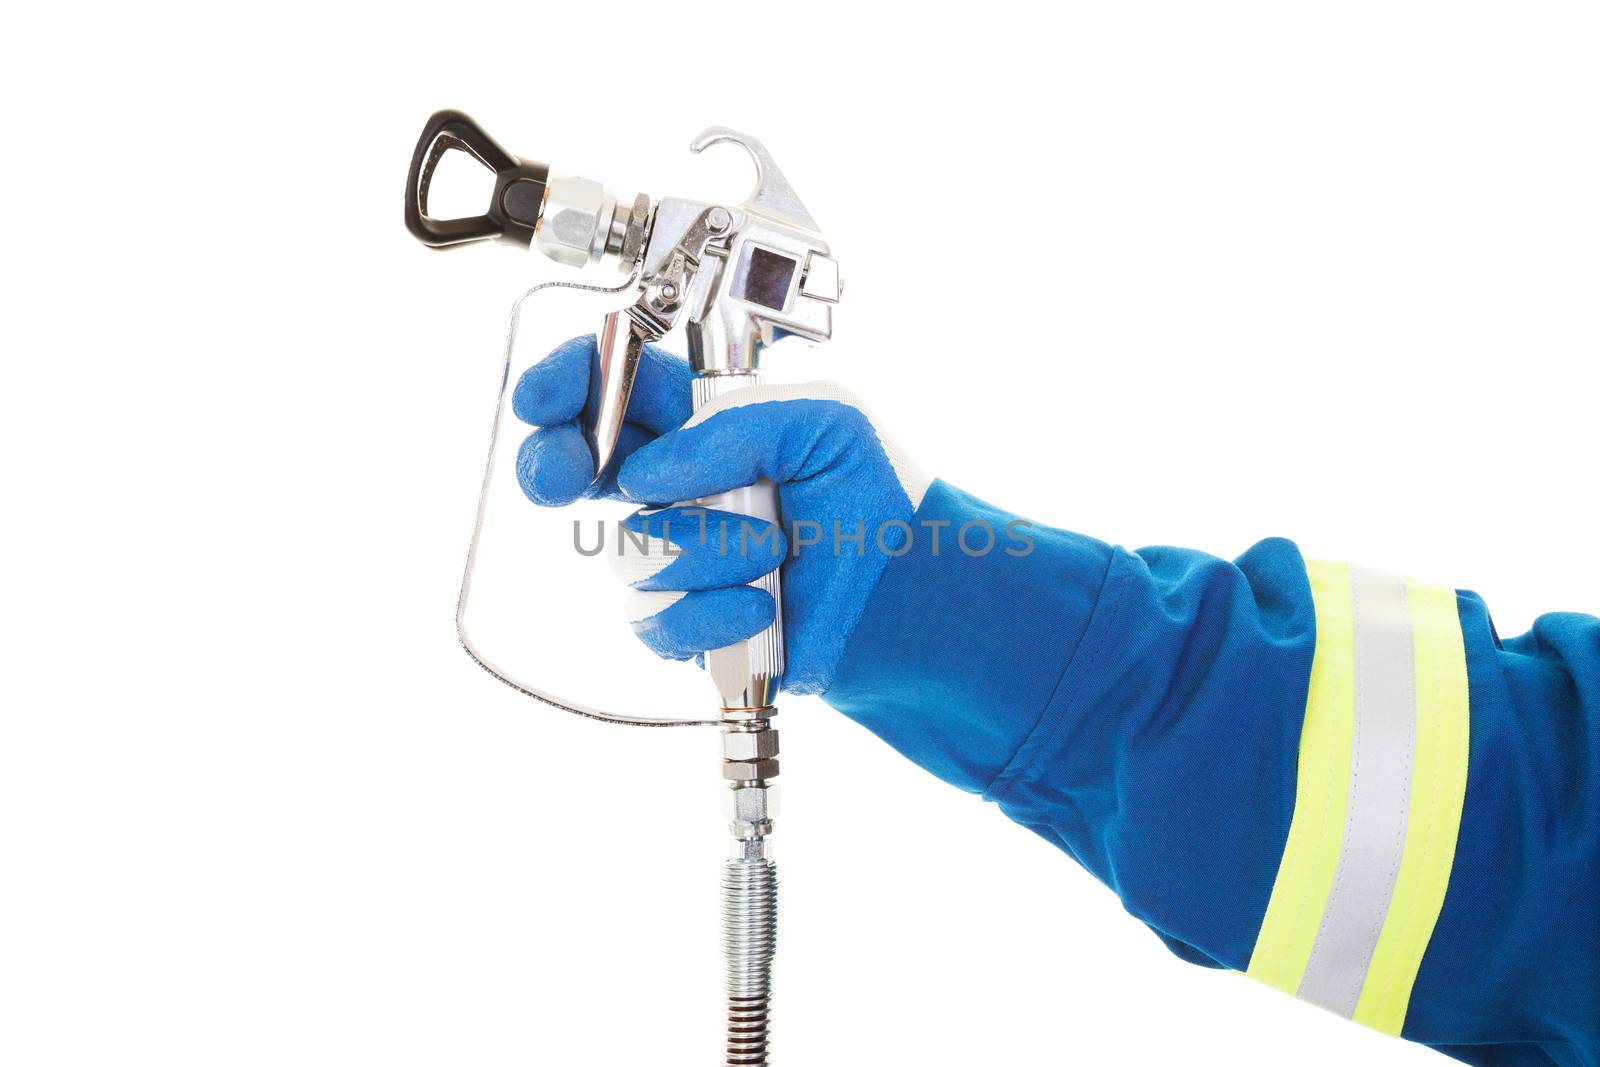 A painter's arm and hand in safety coveralls and gloves holding an Industrial size airless spray gun used for industrial painting and coating.  Shot on white background.